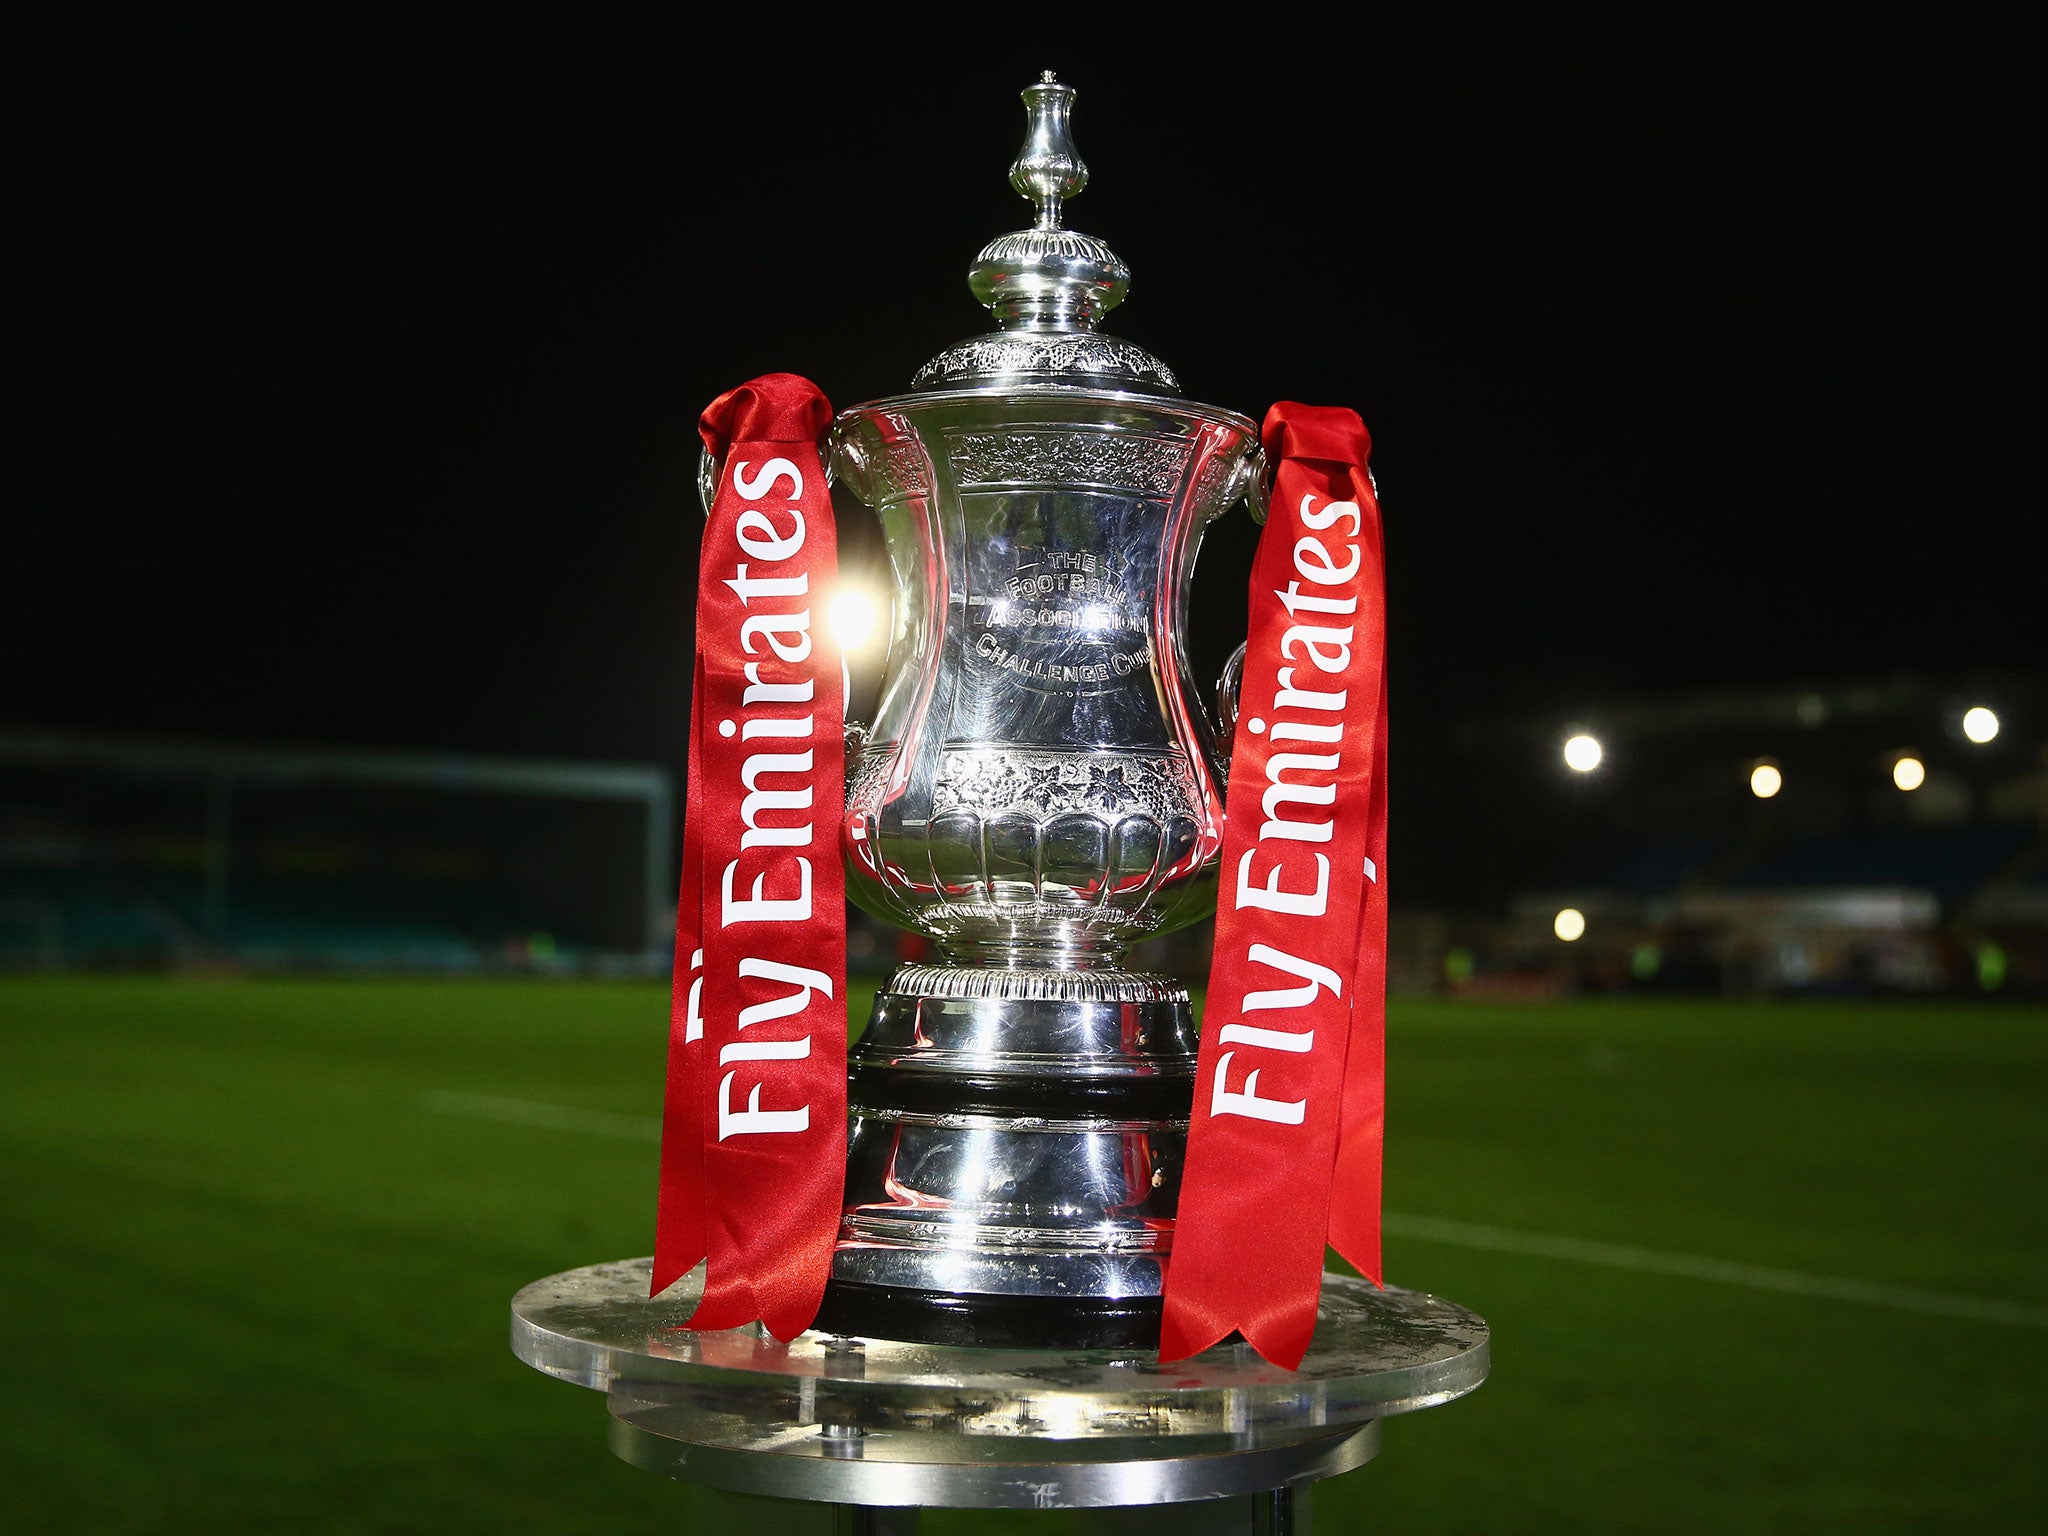 The fourth-round of the FA Cup